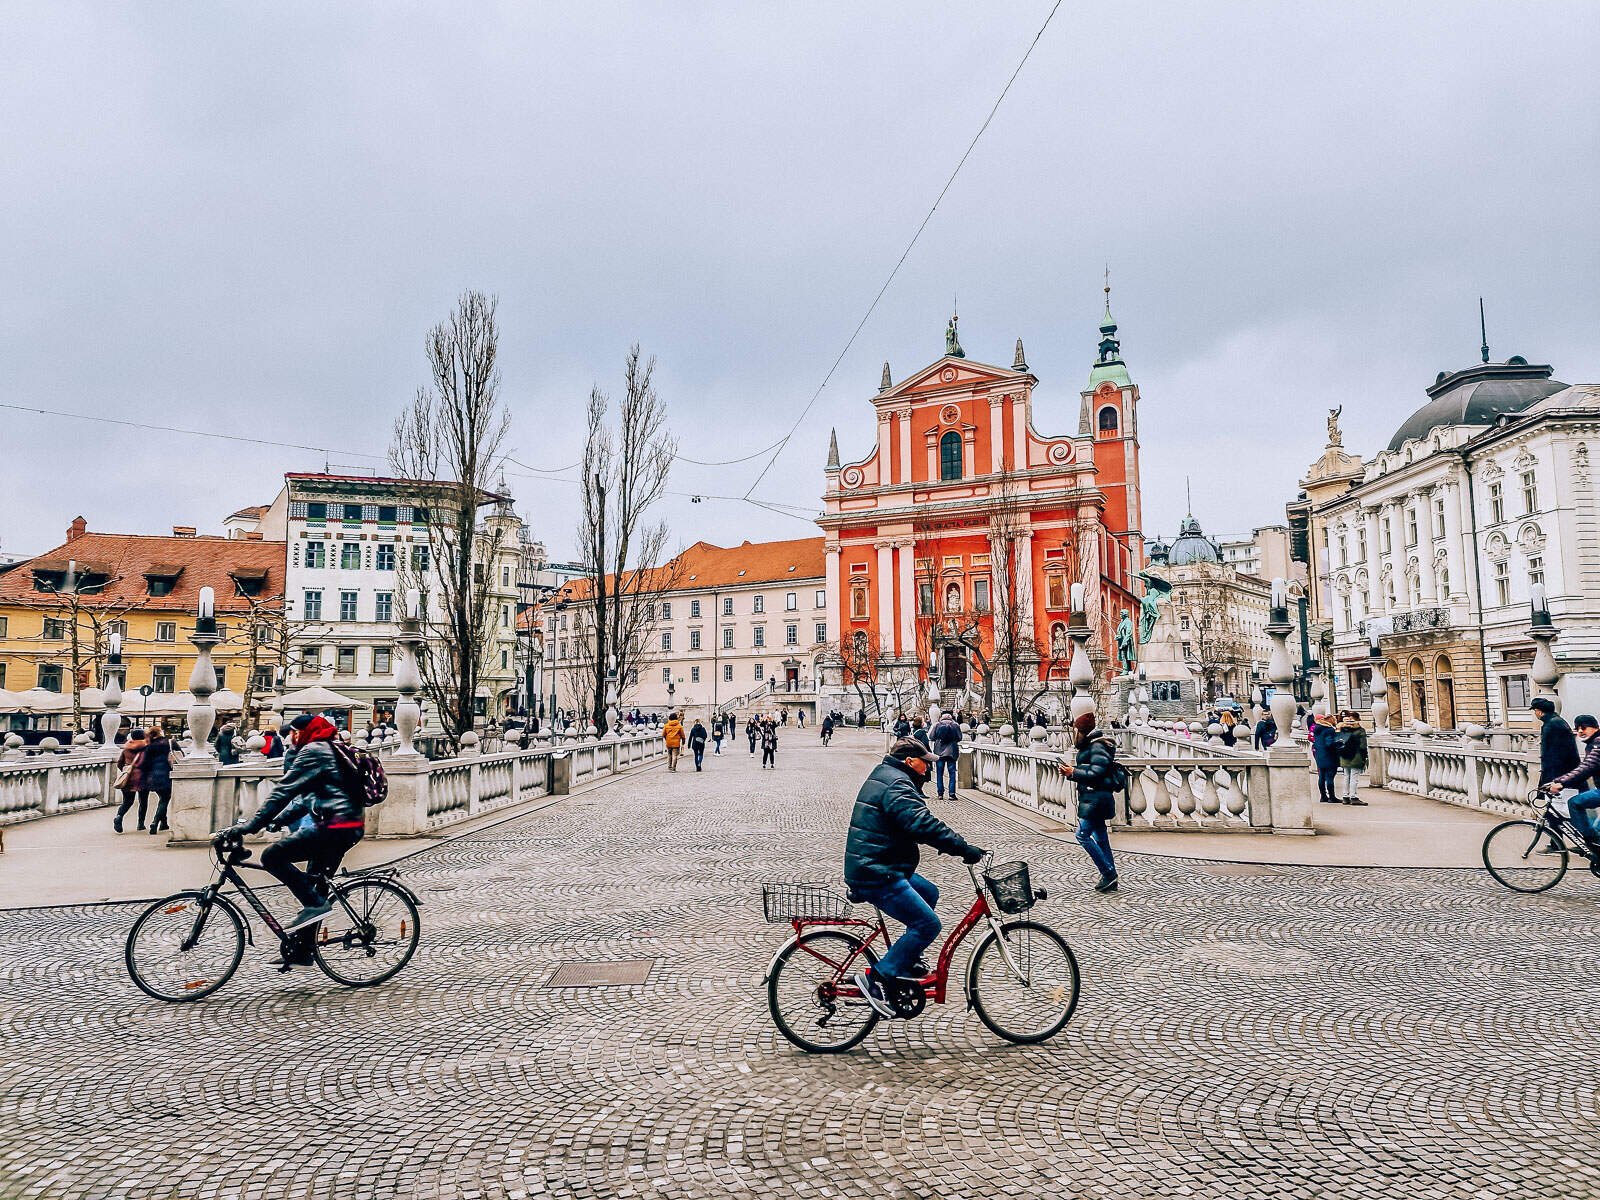 people cycling on a cobbled street in front of a pink church in ljubljana